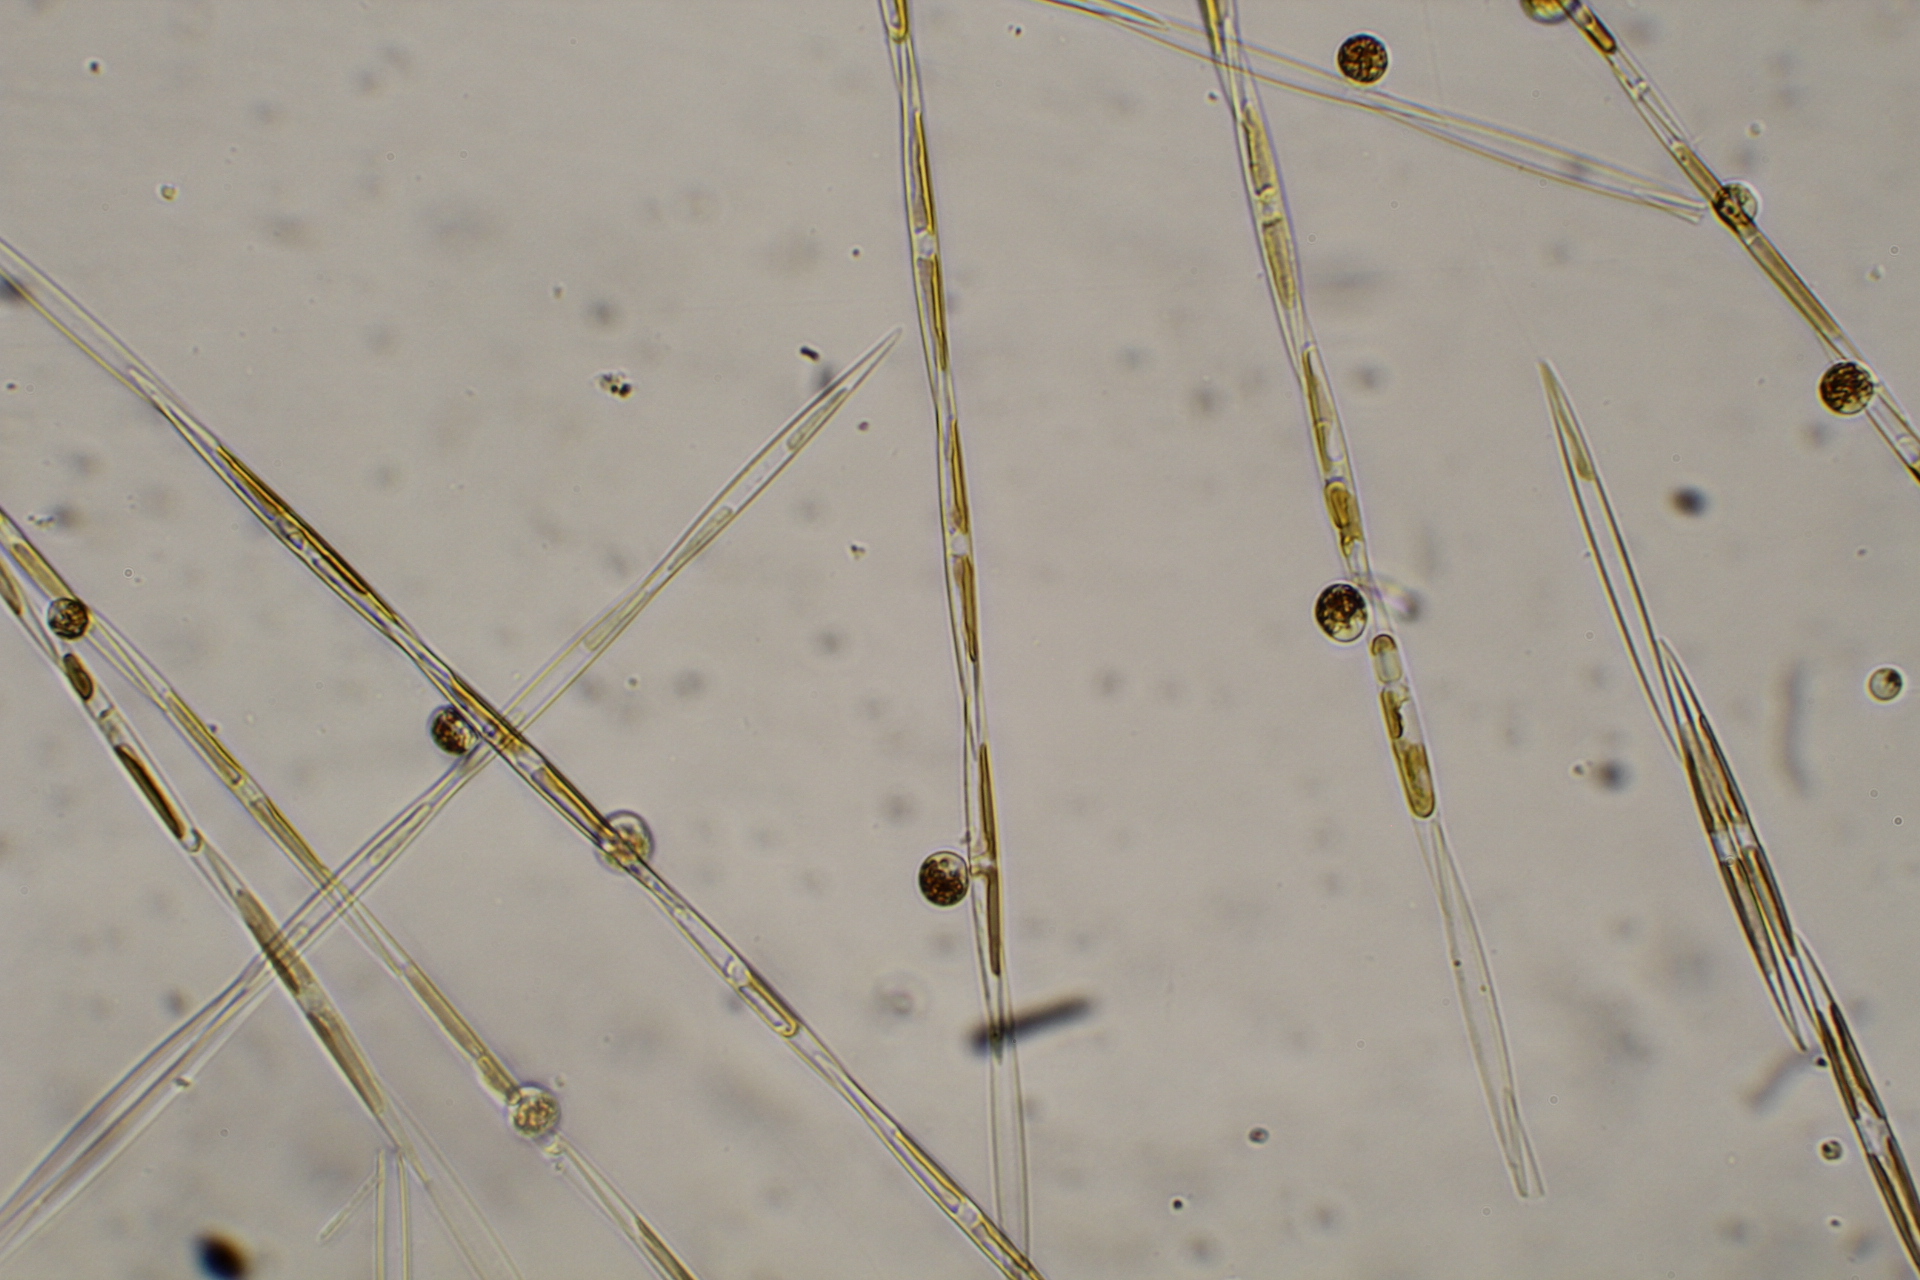  Pseudo-nitzschia, the diatom that produces toxic domoic acid, collected off the Oregon Coast in May. NOAA Fisheries/NWFSC